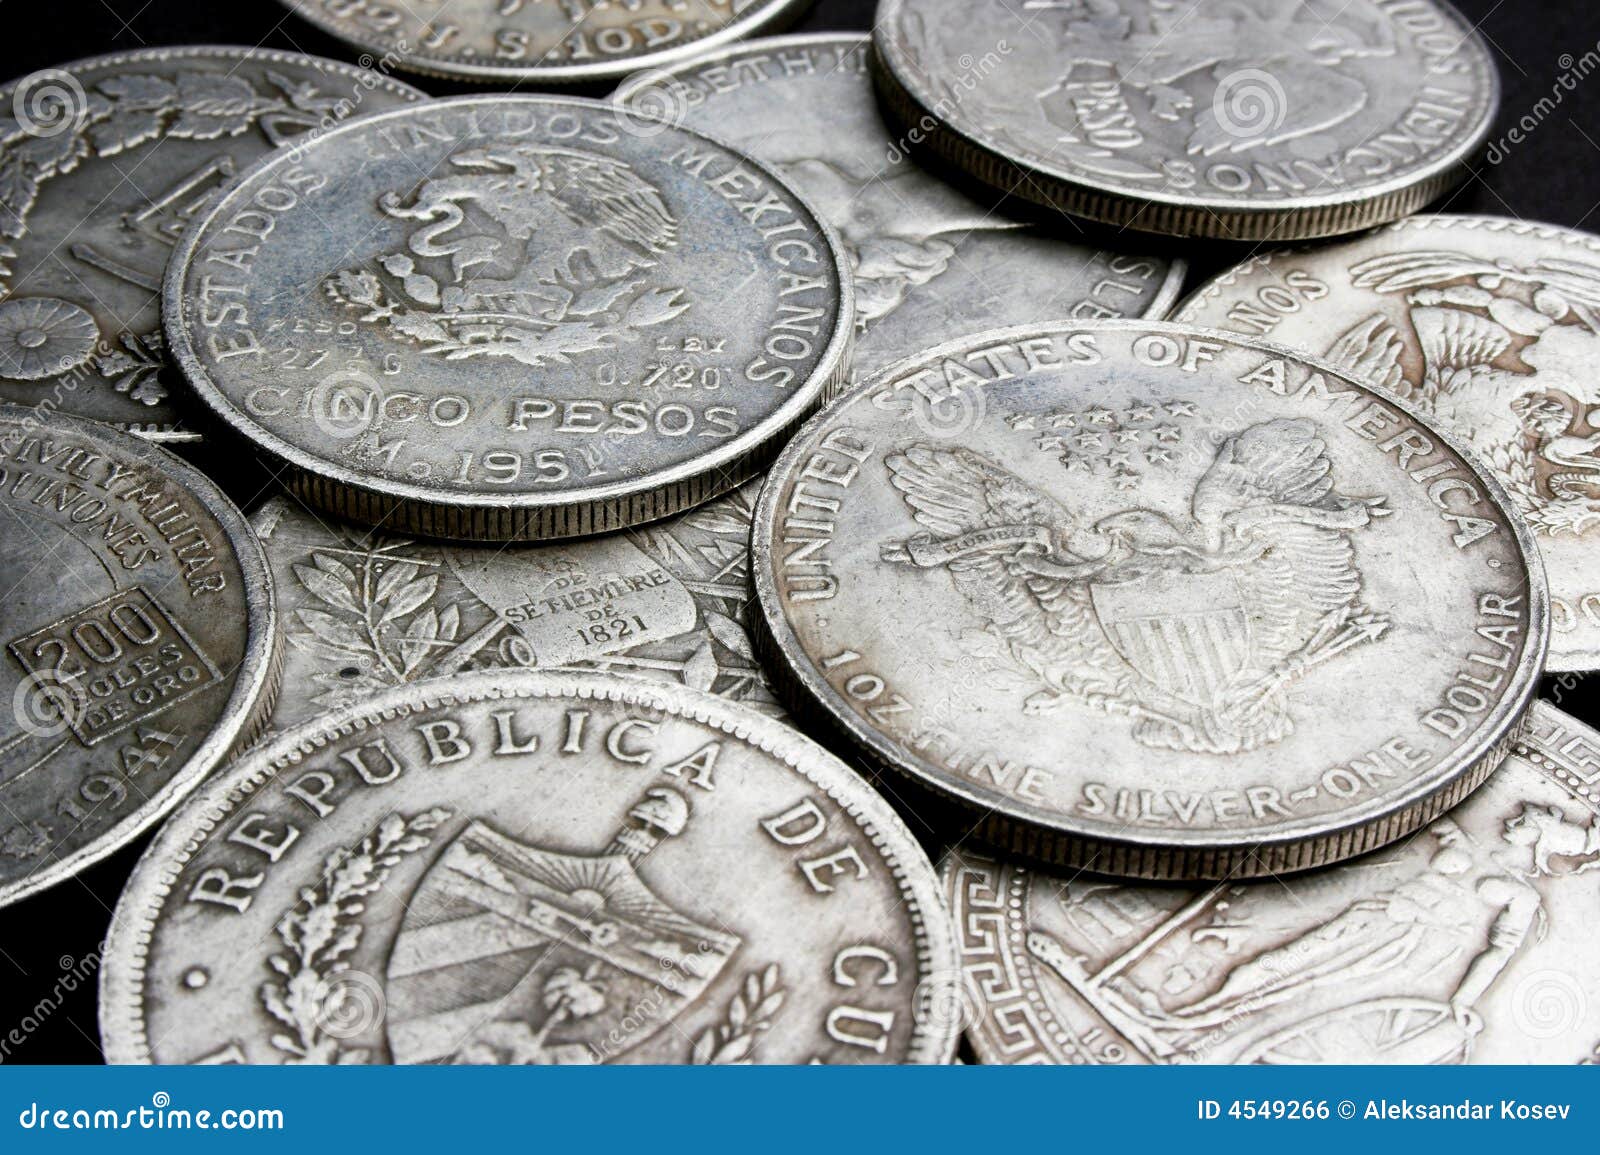 Dollars and coins stock photo. Image of silver, dollar - 4549266